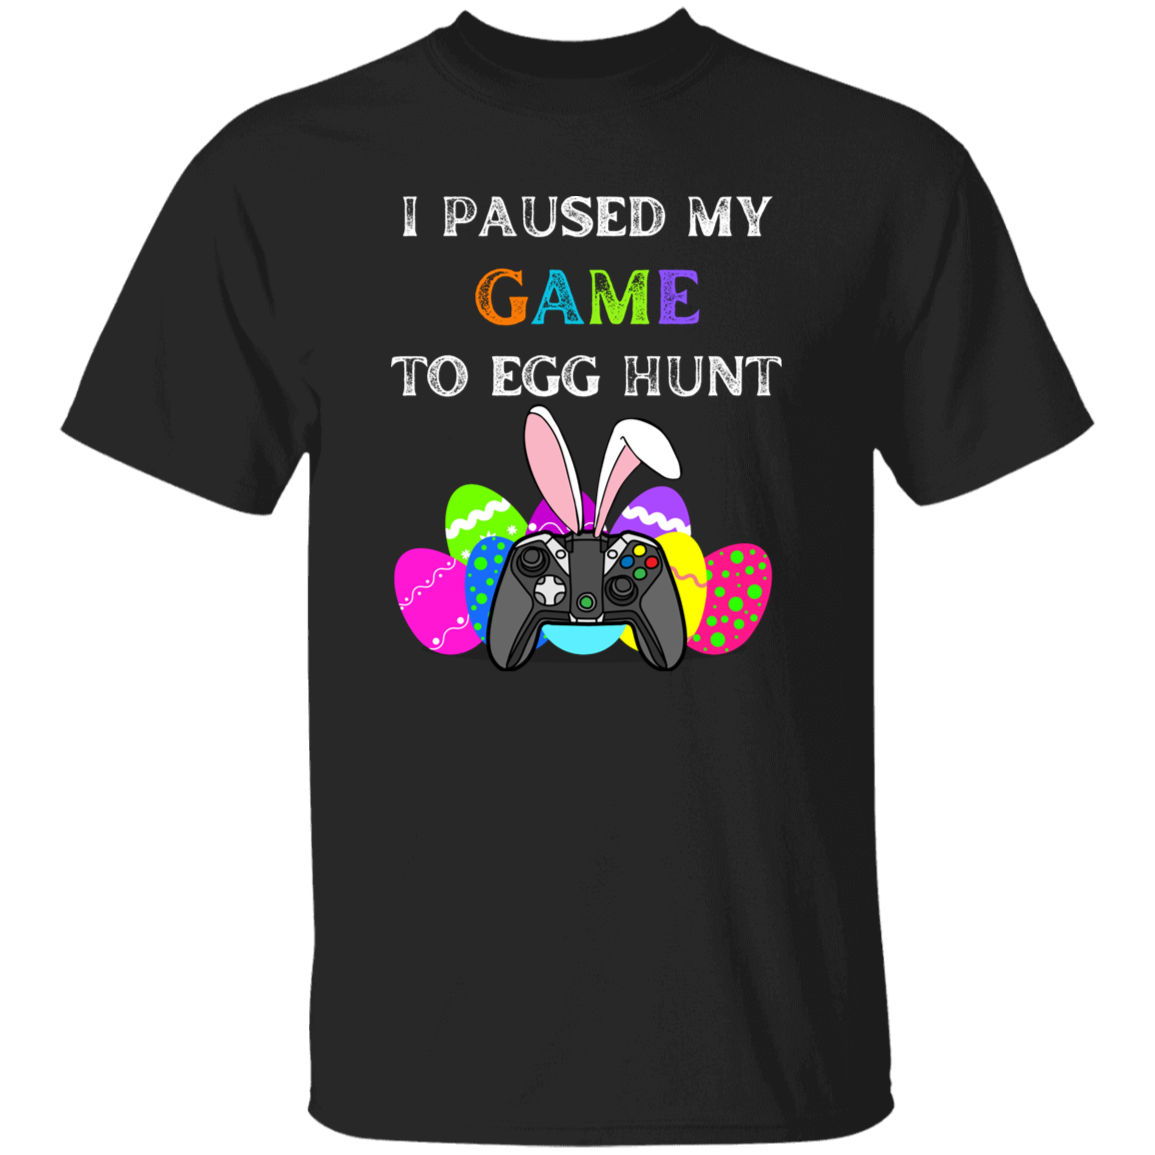 Paused Game to Egg Hunt Youth 5.3 oz 100% Cotton T-Shirt